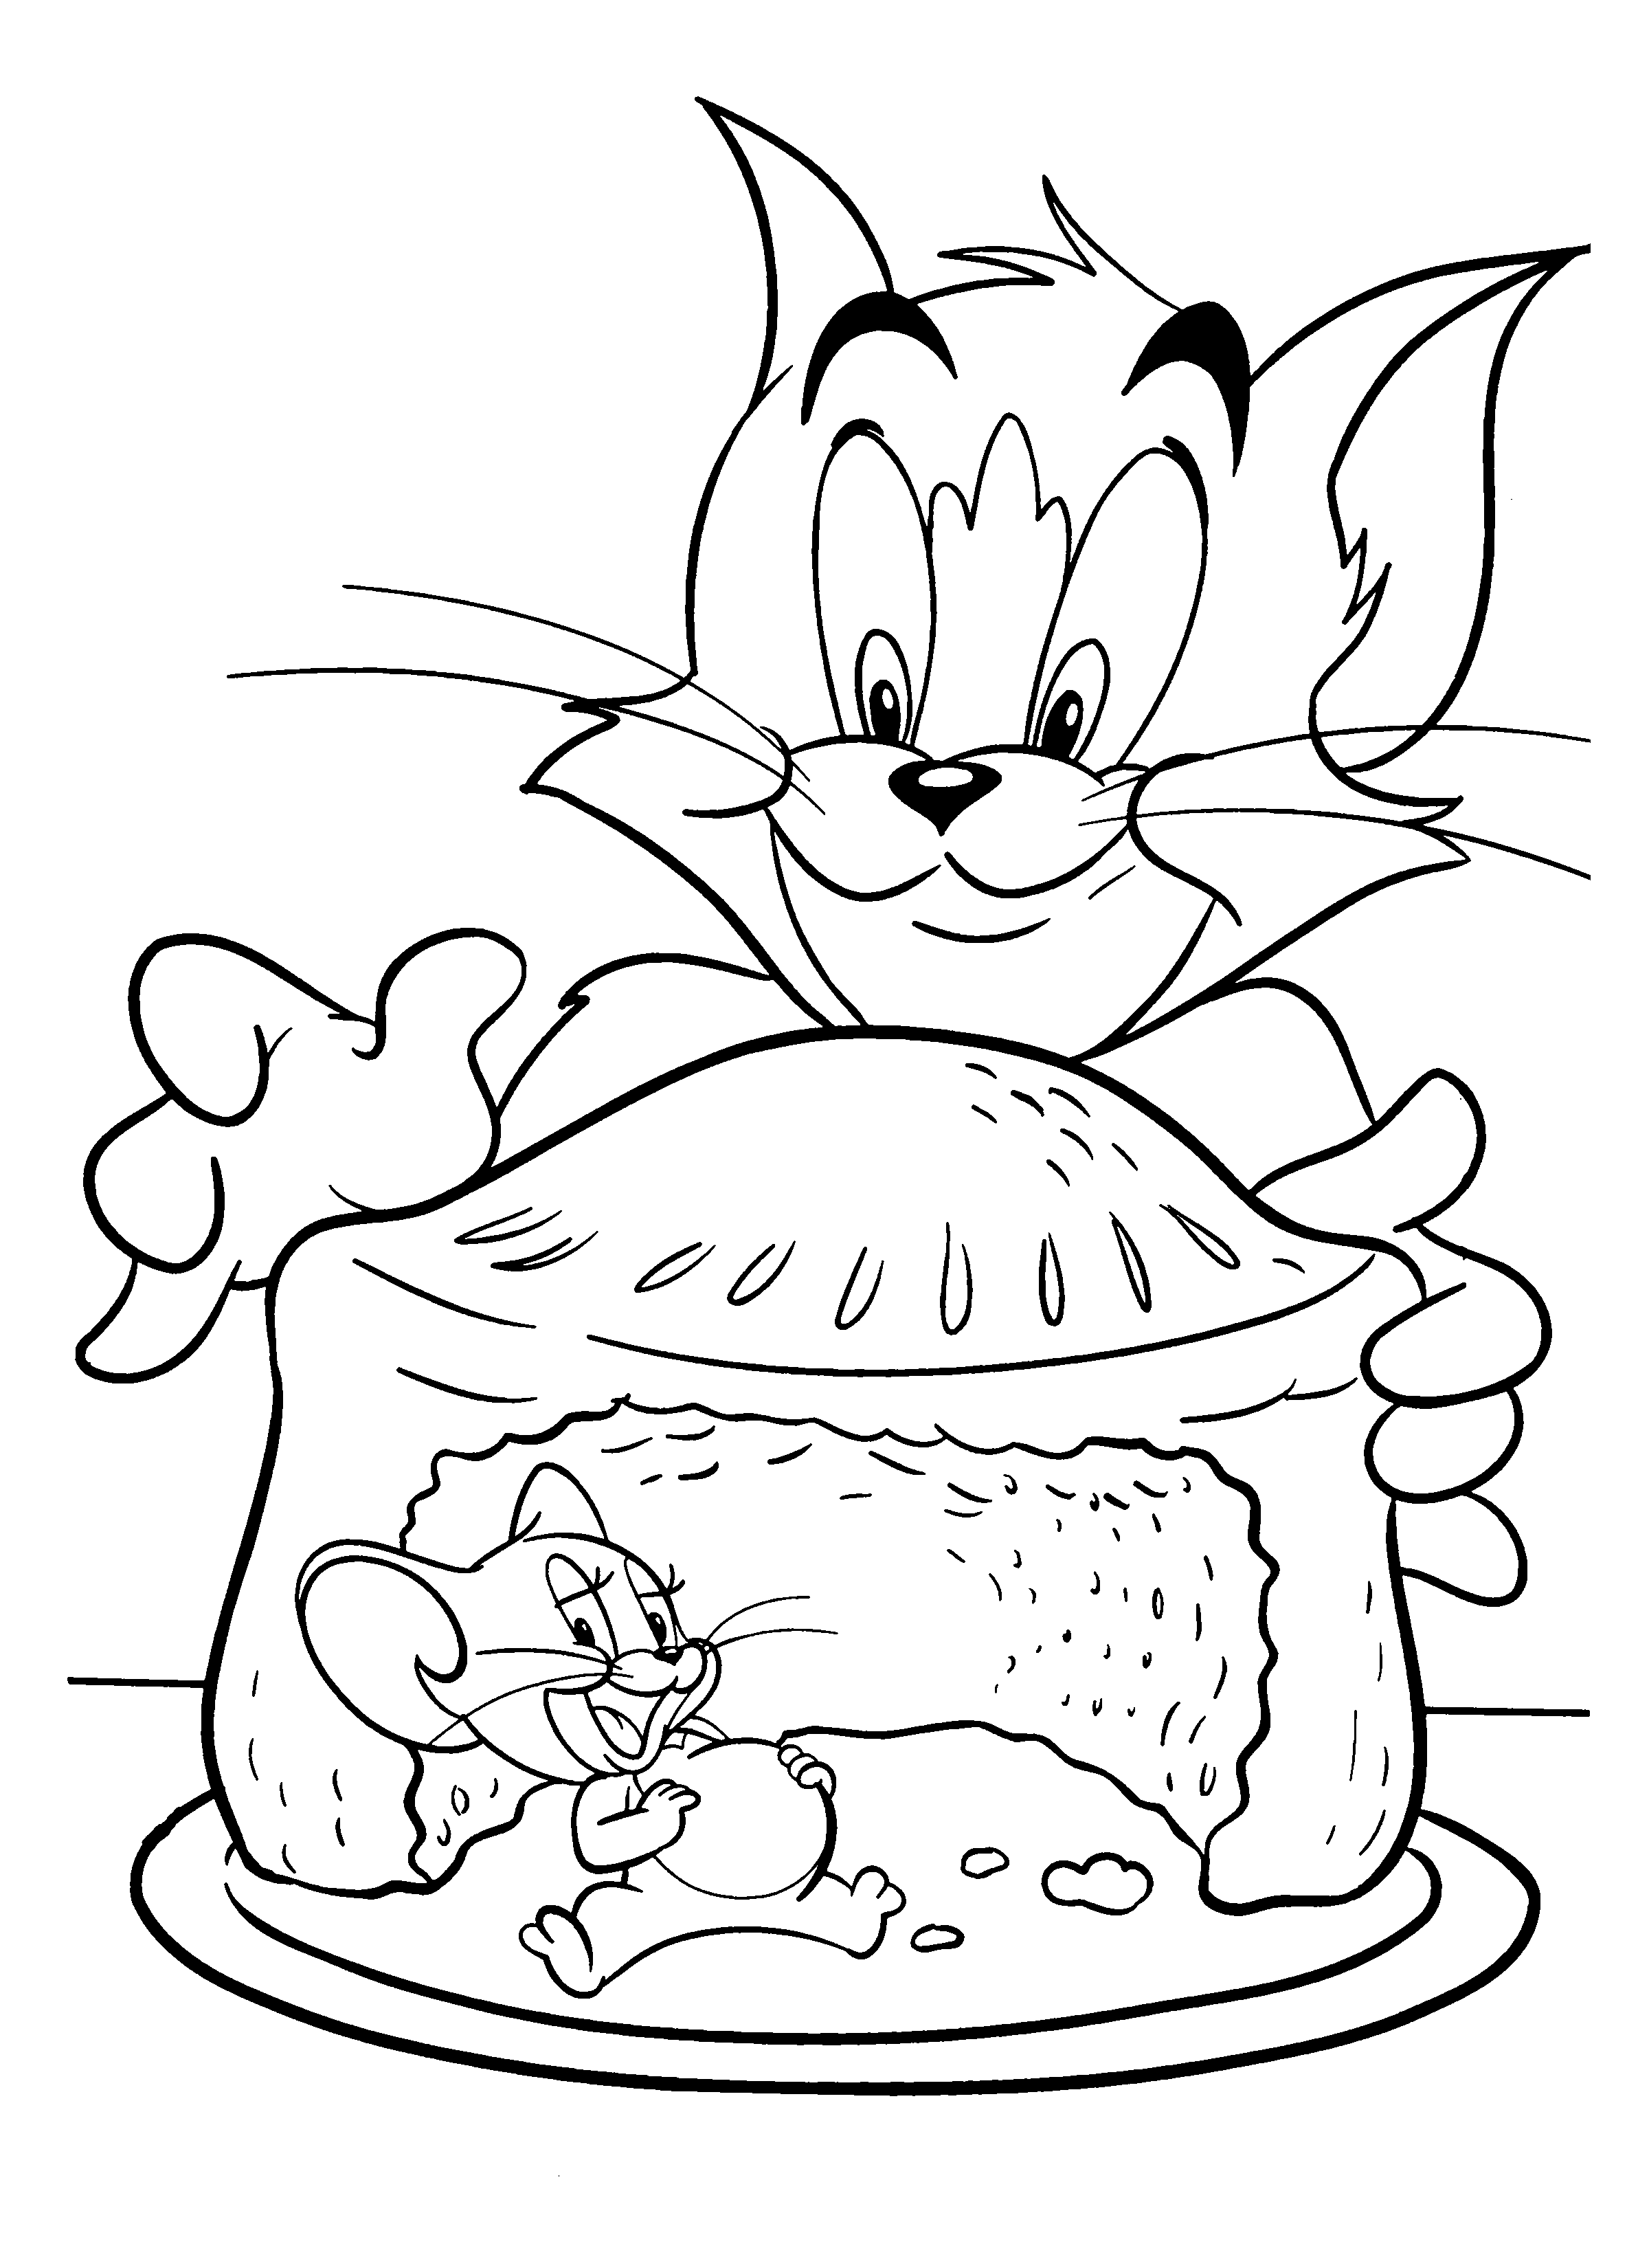 Free Tom and Jerry coloring pages to print - Tom And Jerry Kids ...